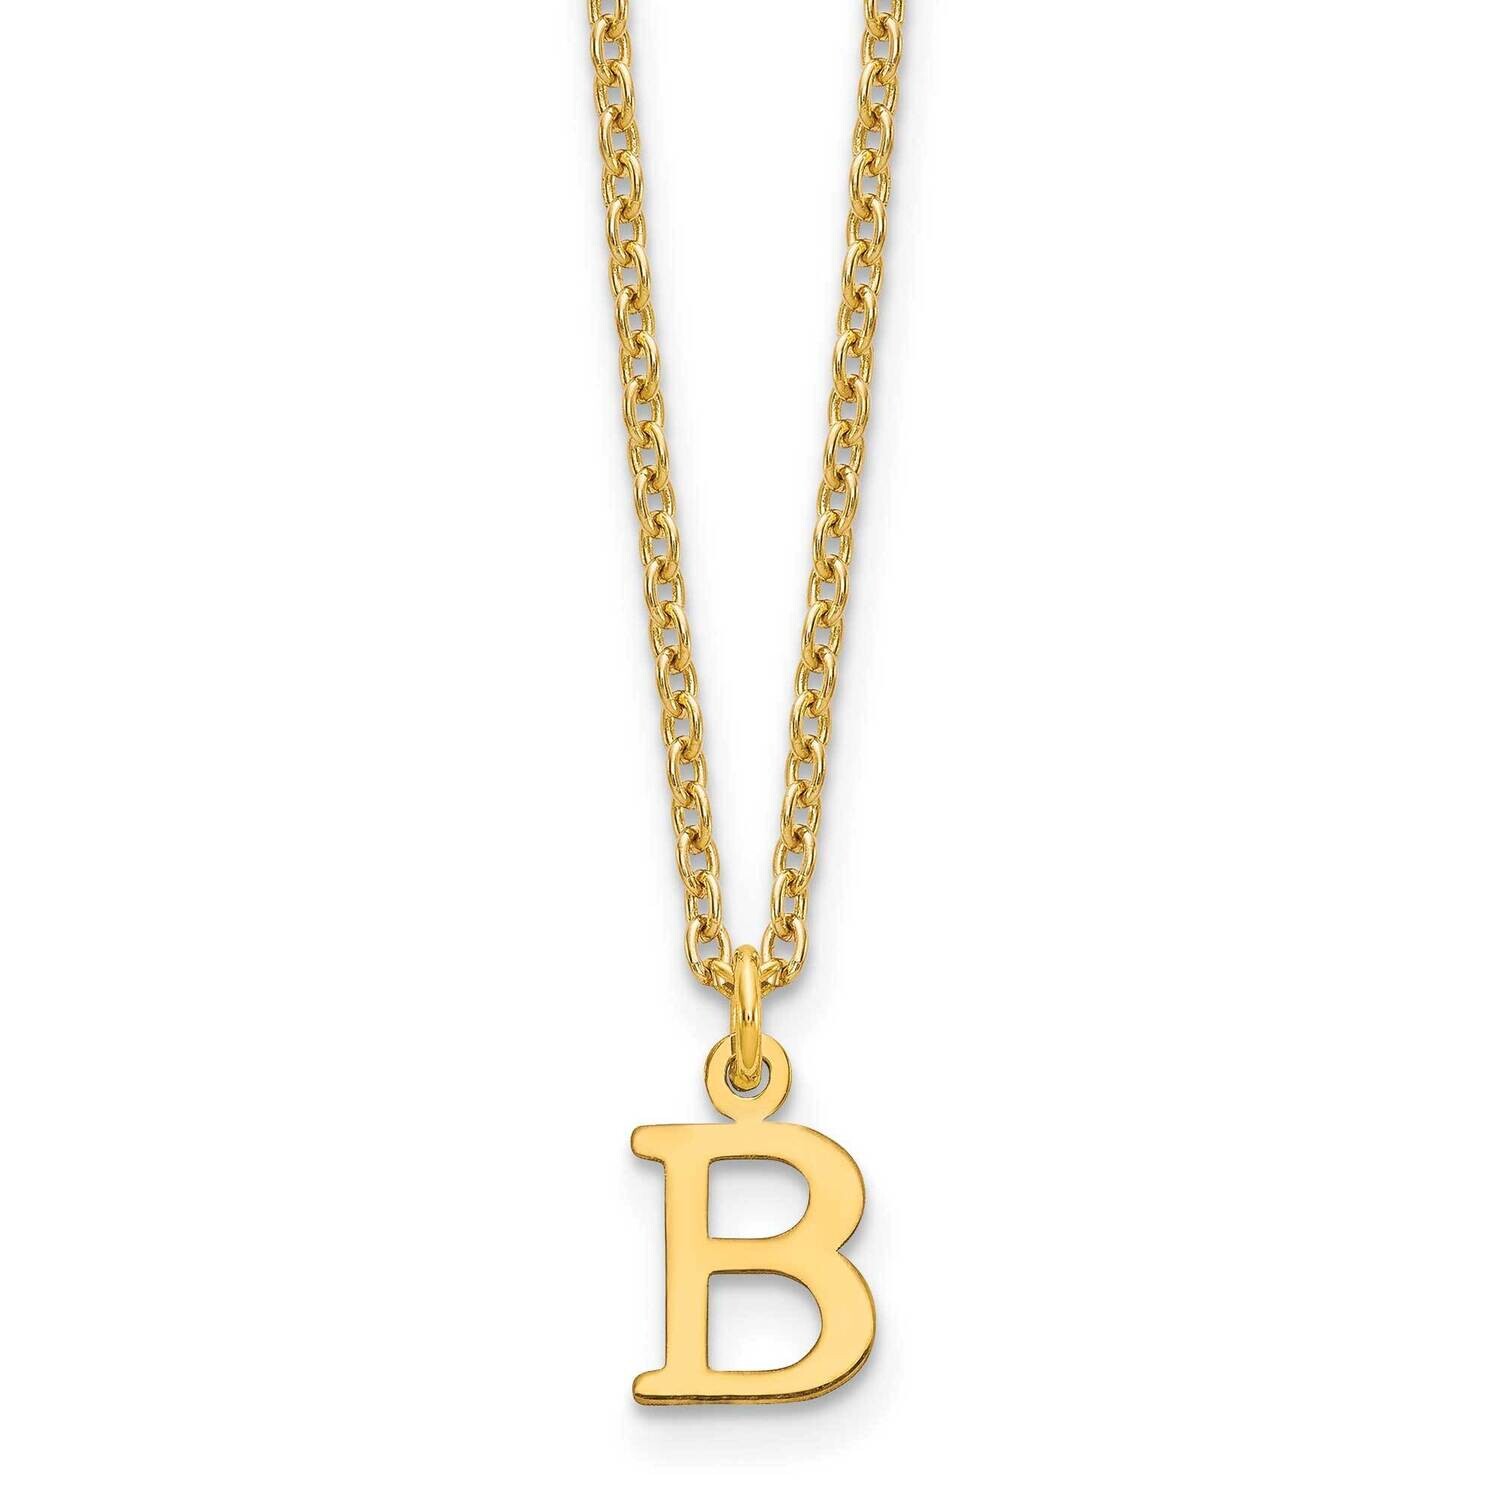 Gold-Plated Cutout Letter B Initial Necklace Sterling Silver XNA727GP/B